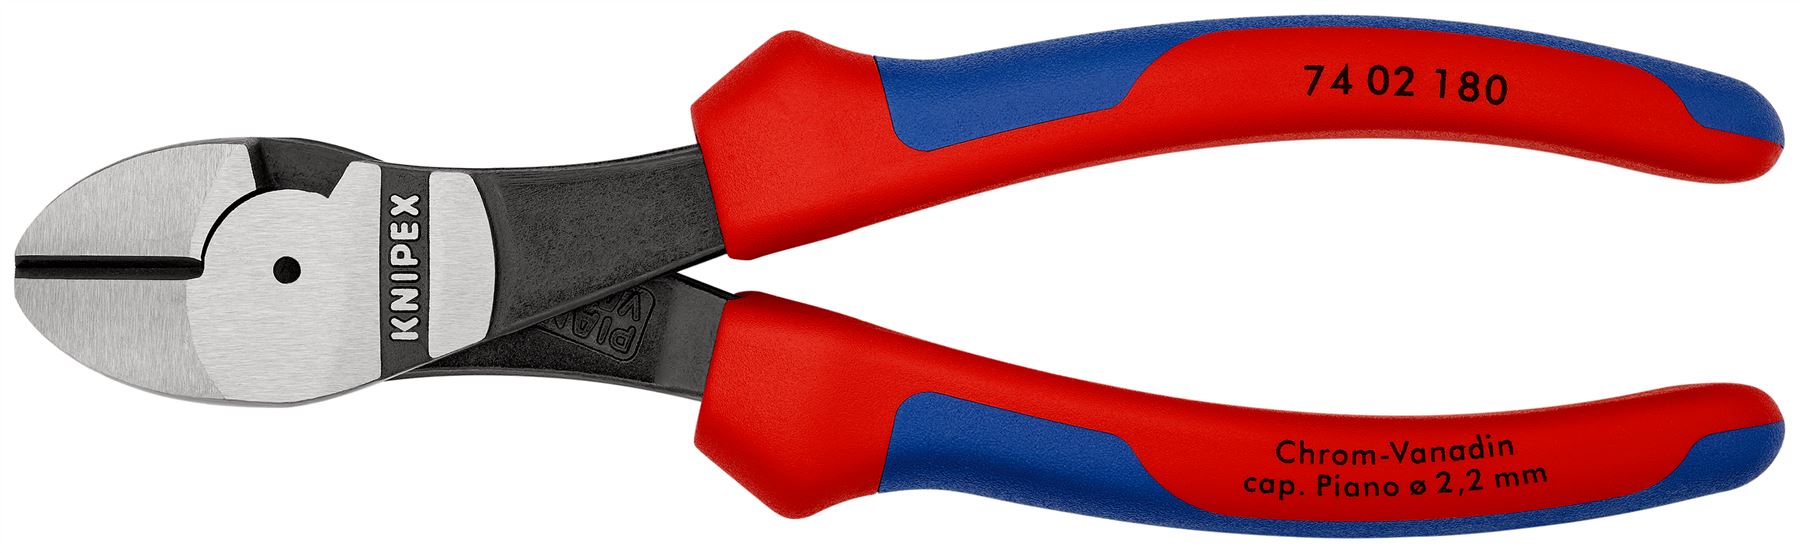 Knipex Diagonal Side Cutting Pliers Nippers High Leverage 180mm Multi Component Grips 74 02 180